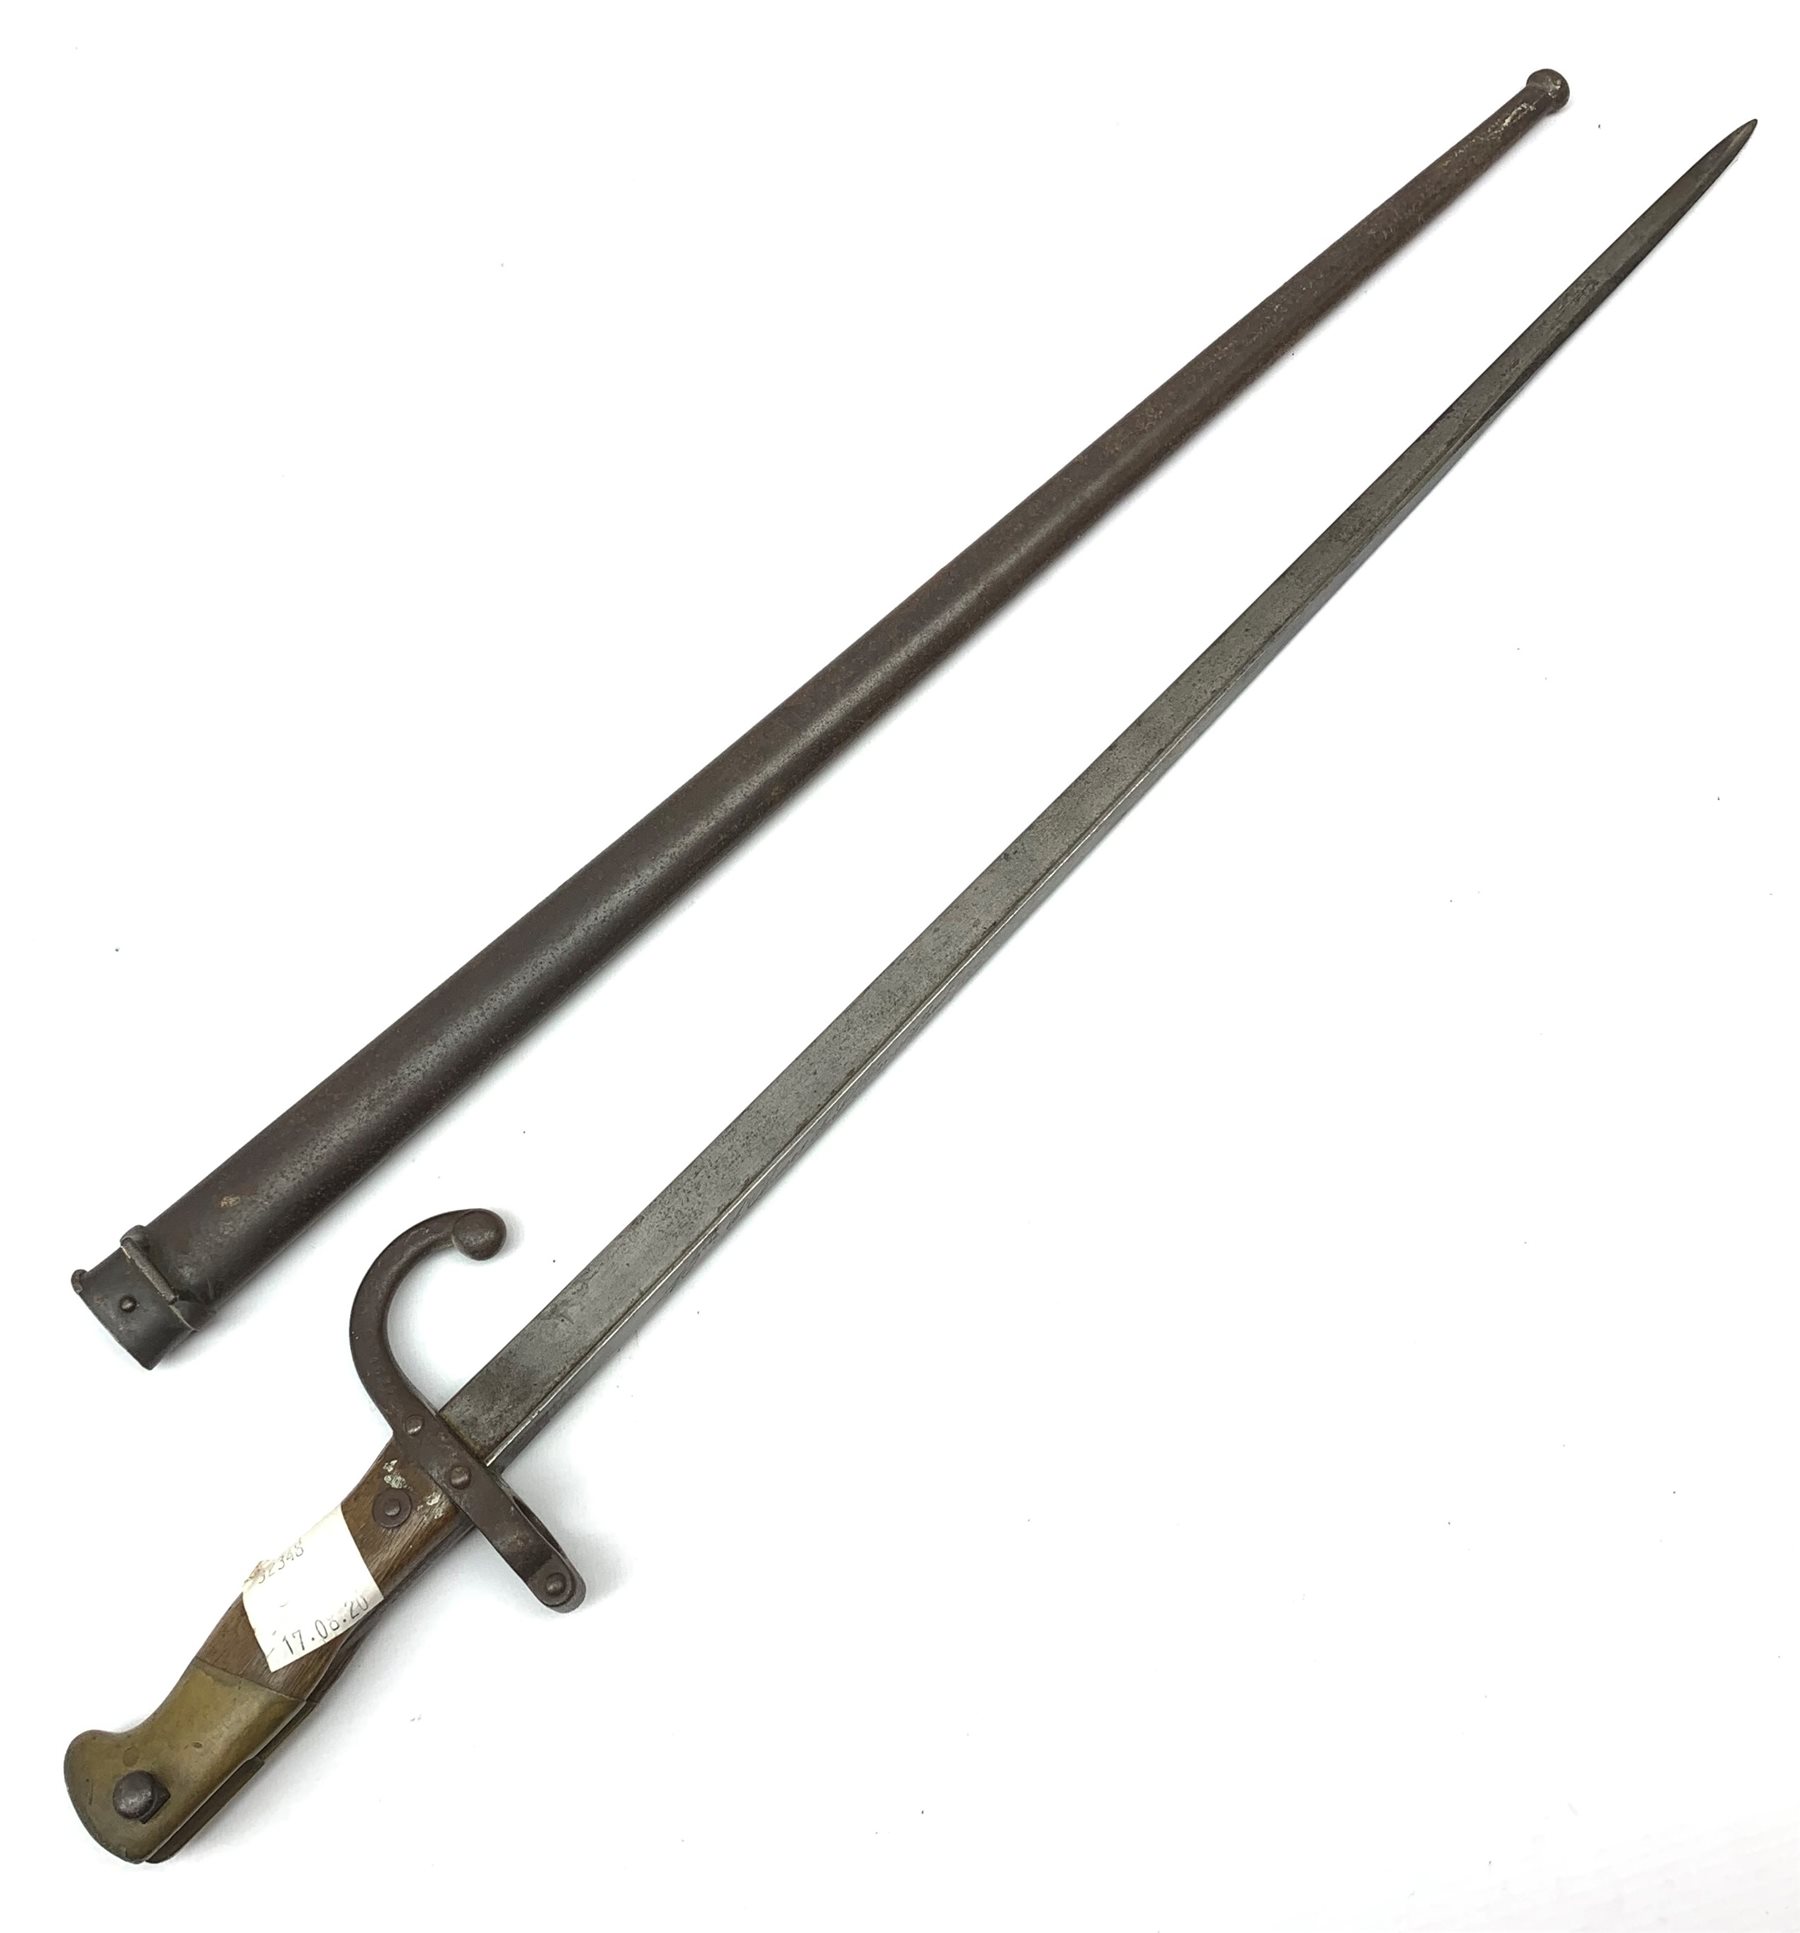 in Janvier 1874 Taxidermy St. & overall Etienne d\'Armes Epee \'Mre. L66cm Country Pursuits, Sporting Model steel de steel inscribed bayonet French Militaria blade - Guns, scabbard 1880\', 52cm the